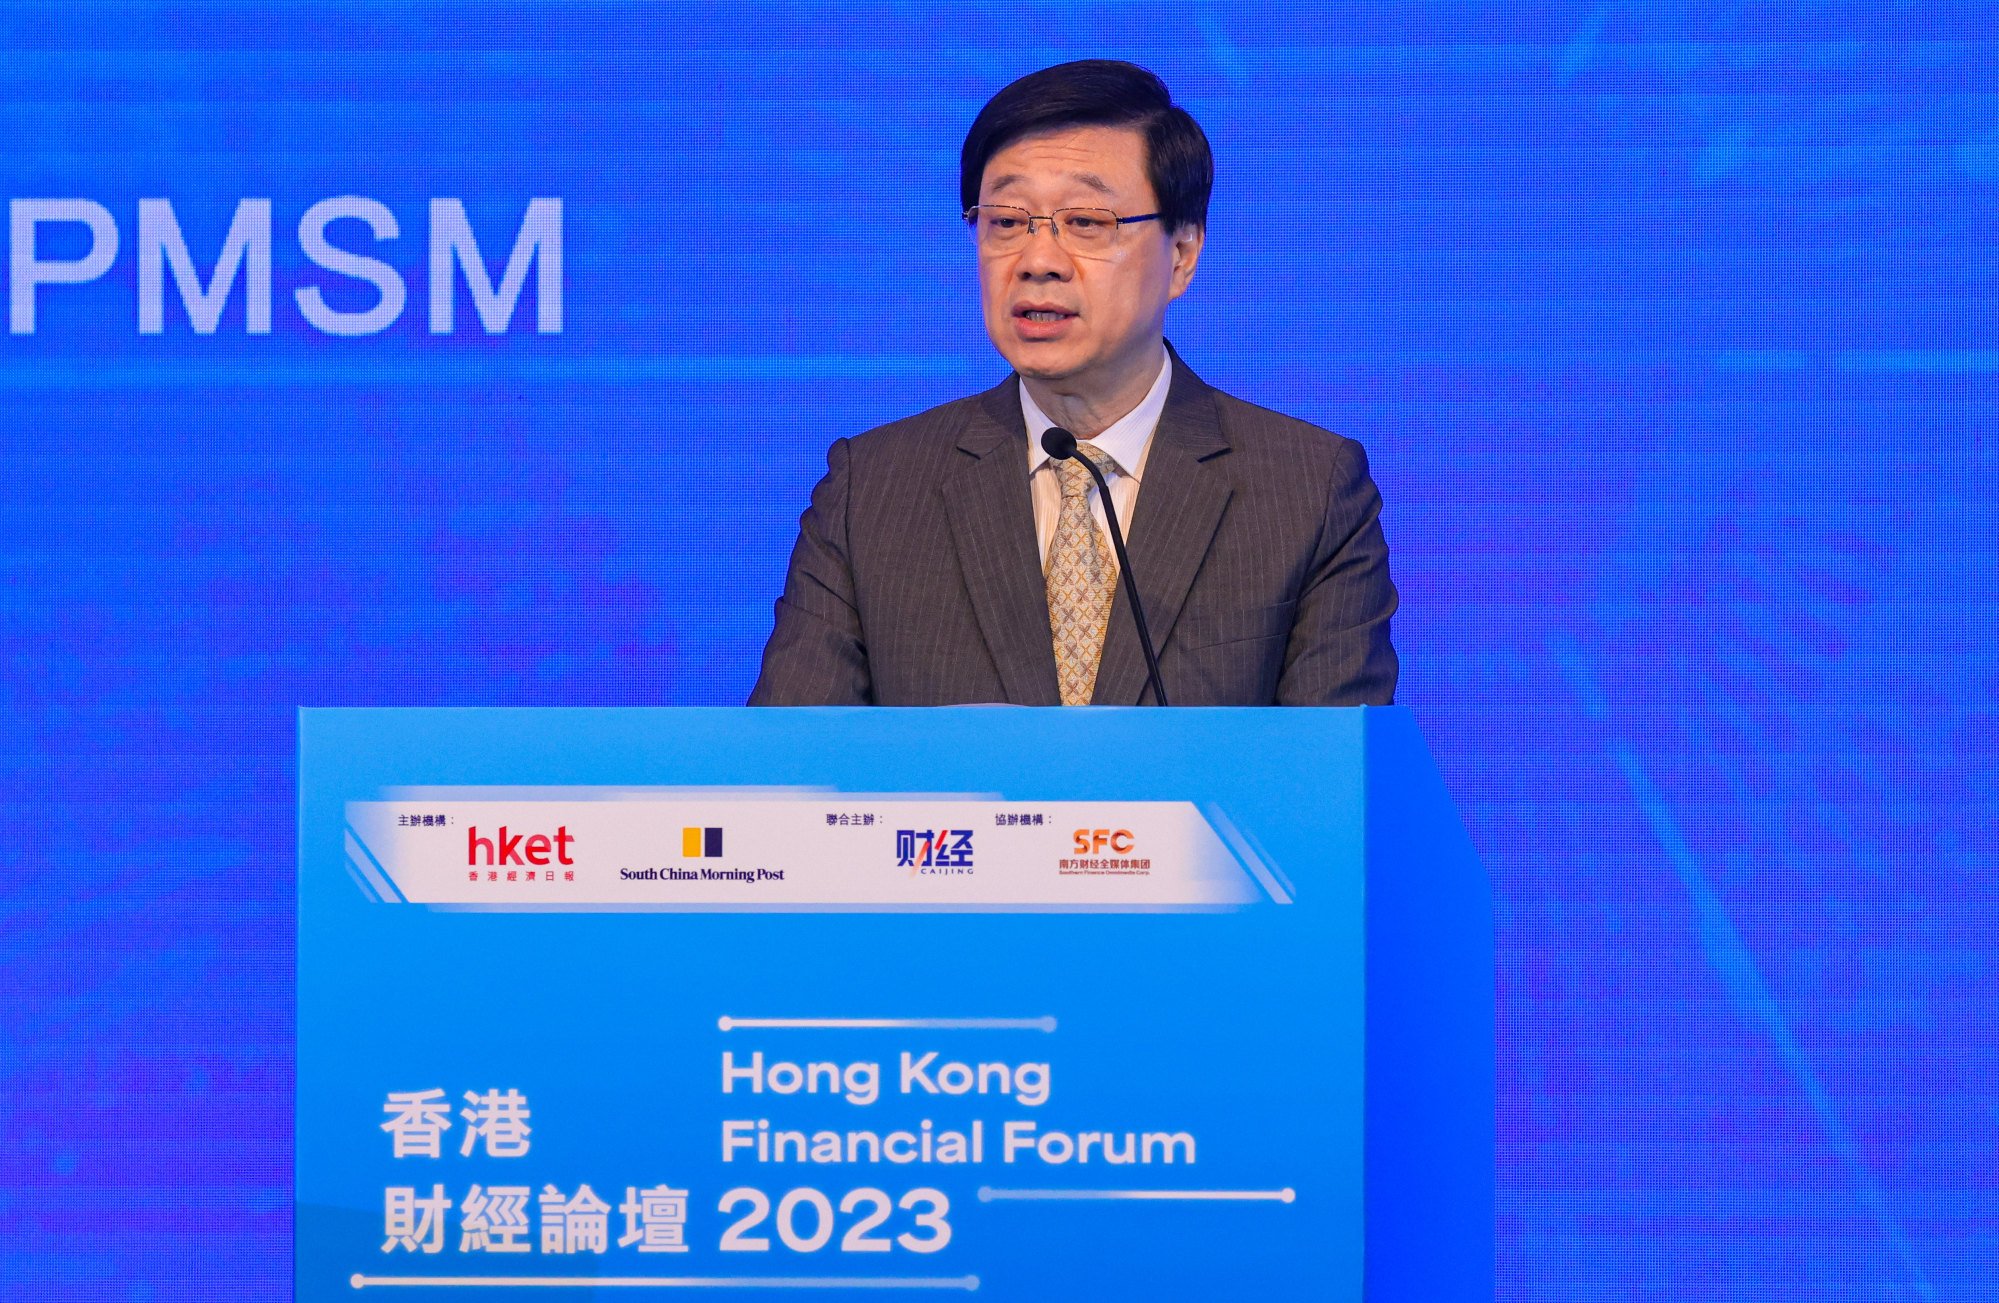 hong kong maintaining international character is the ‘secret code’ for it to thrive and contribute to country, says beijing’s top official in city